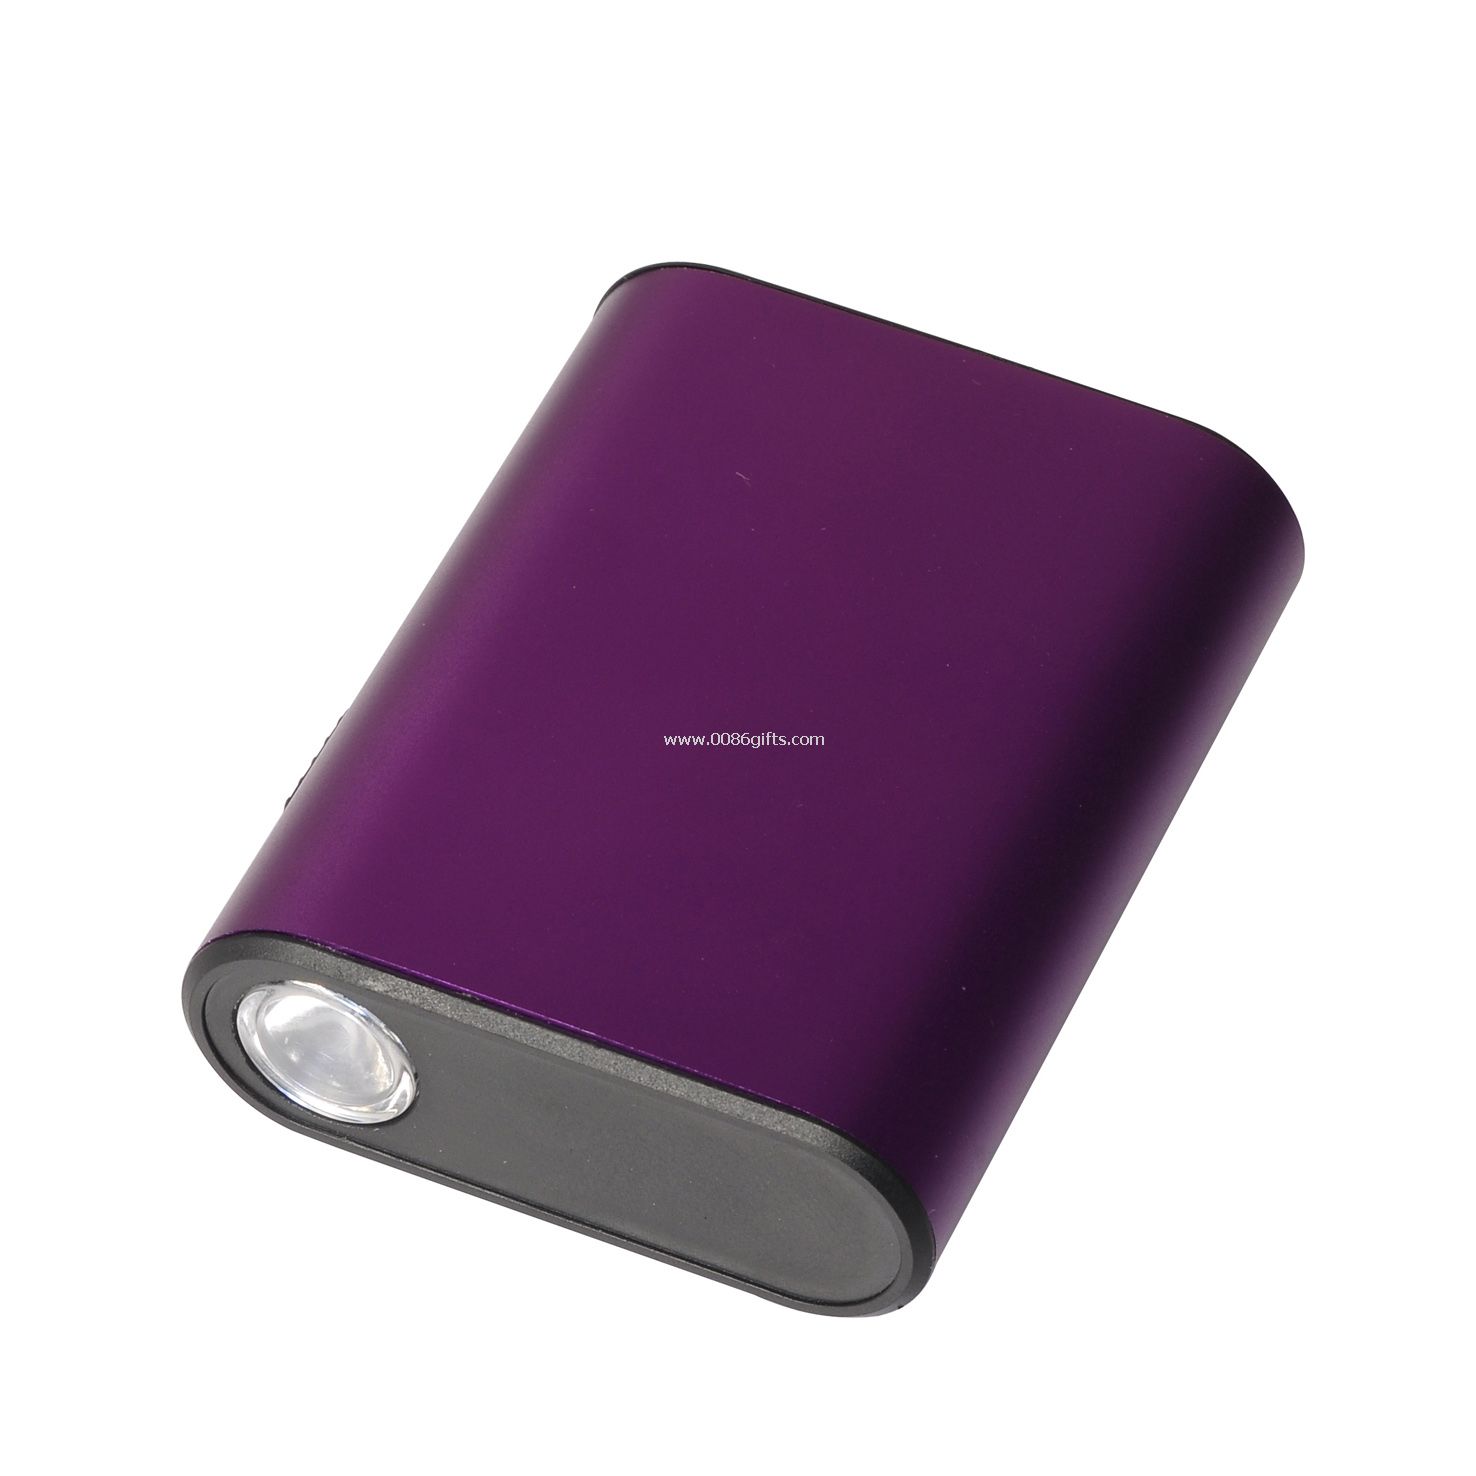 Mobile power bank with light